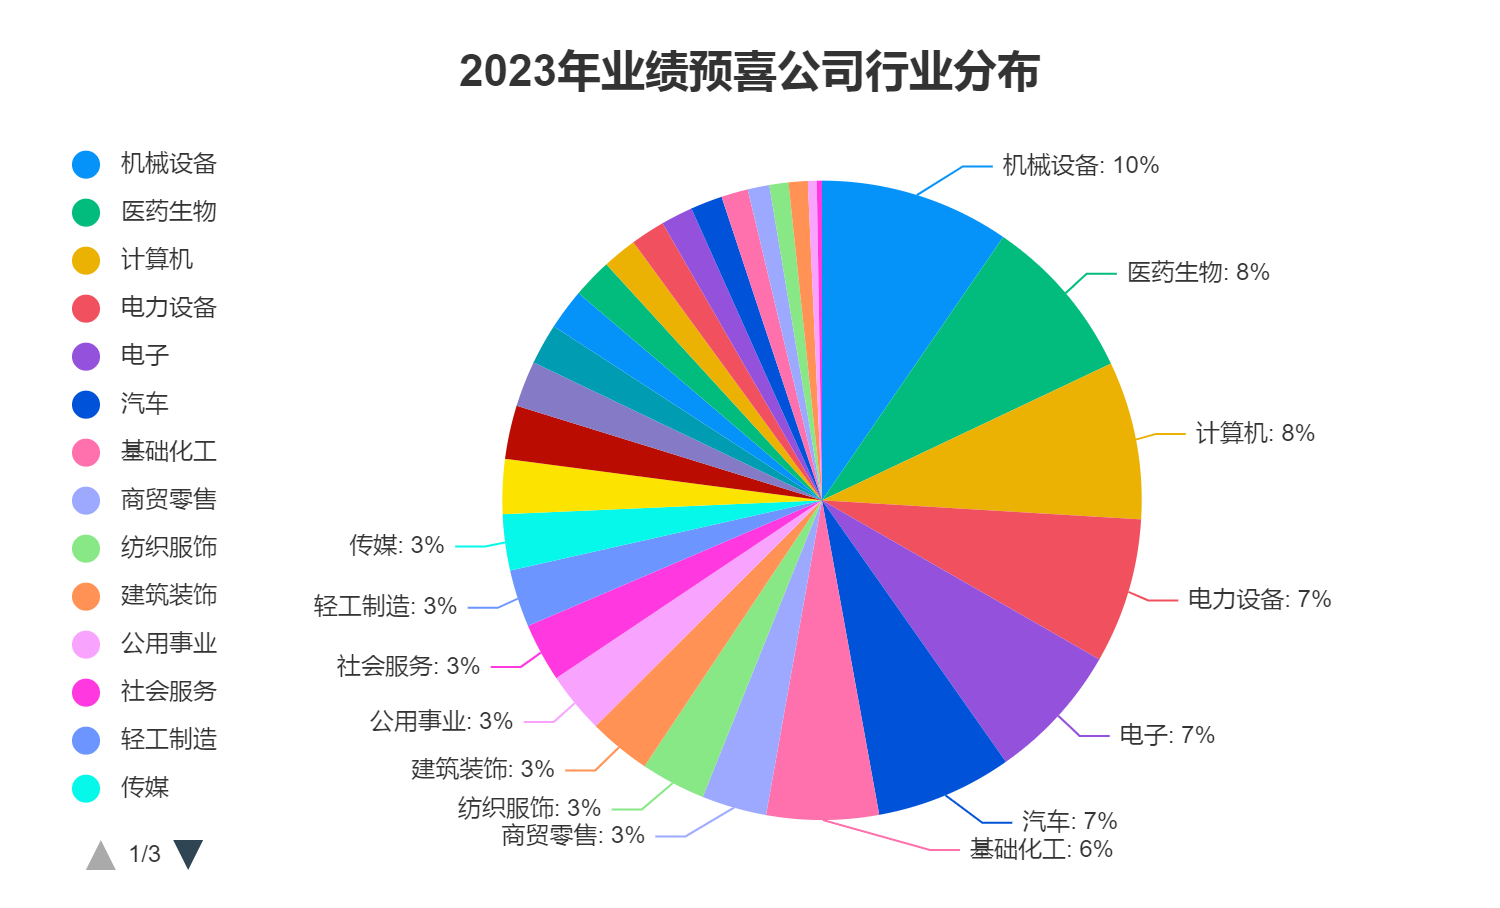  Industry distribution of companies with good performance in 2023